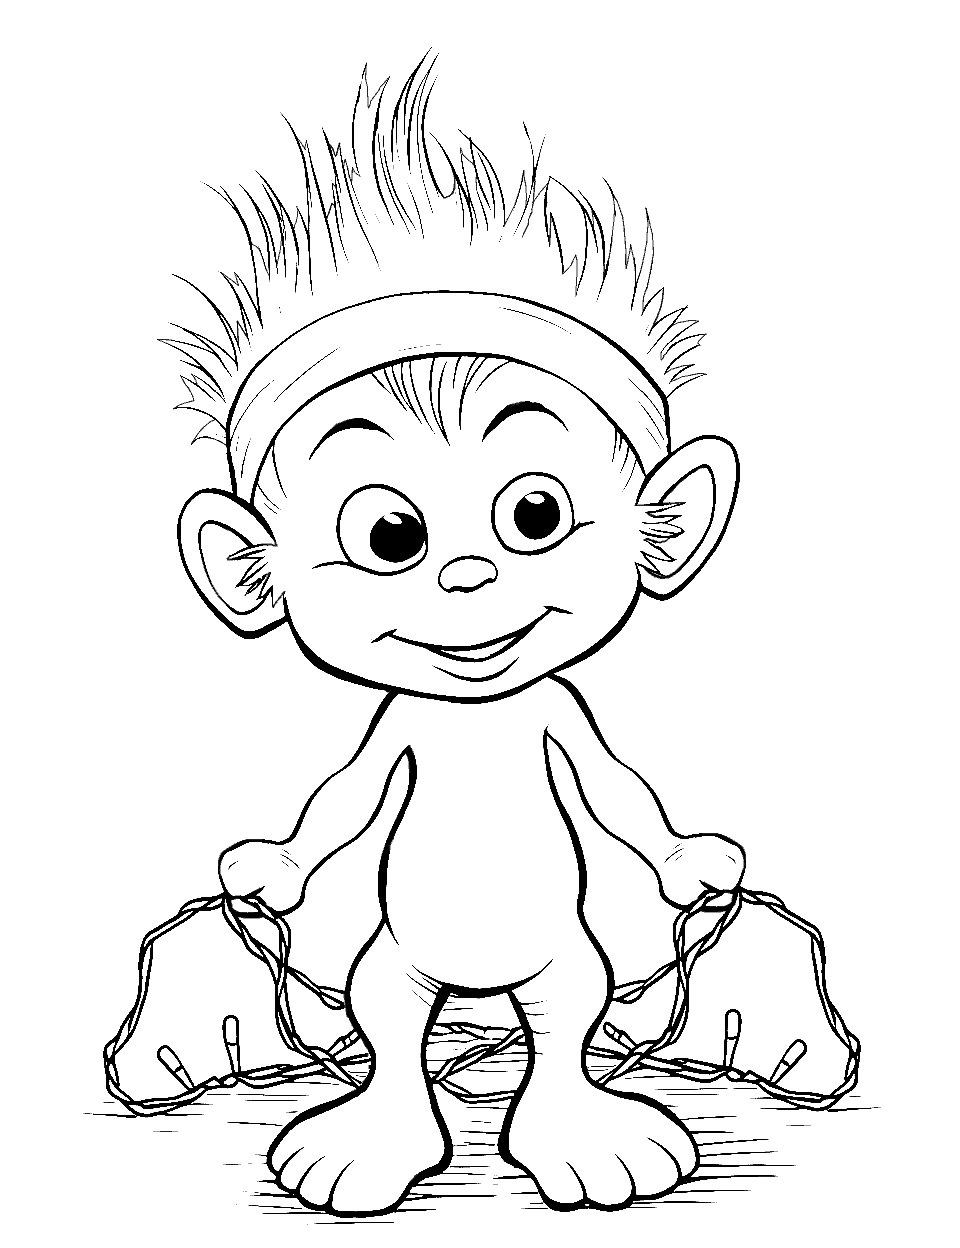 Baby Grinch’s Innocence Coloring Page - A cute baby Grinch is playing with colorful Christmas lights.